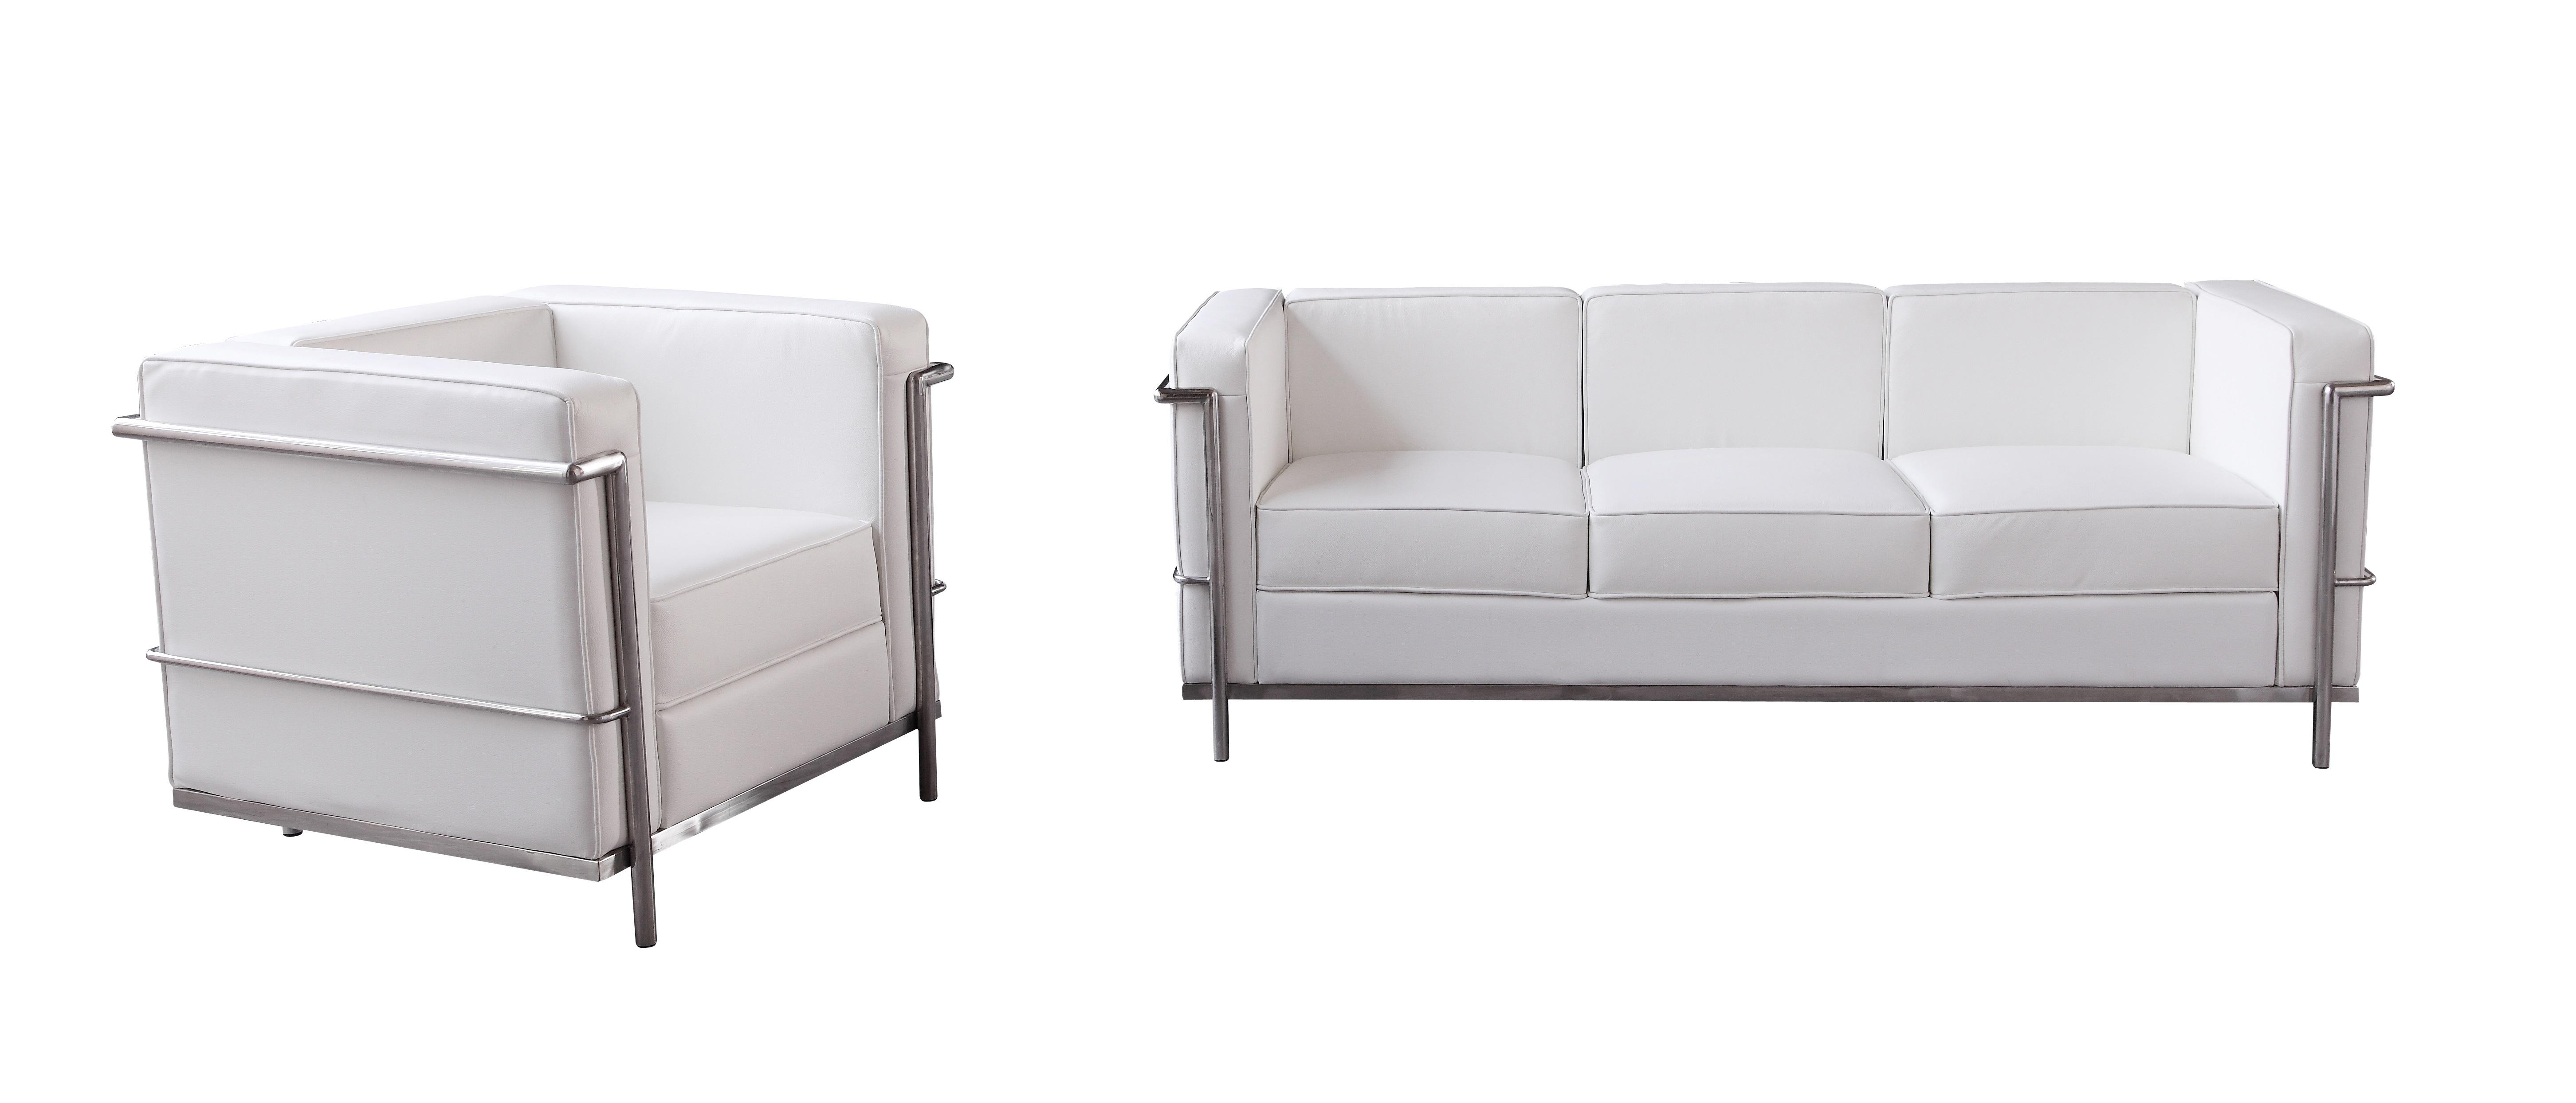 Modern Sofa and Chair Cour SKU 176551-W-Set-2 in White Leather